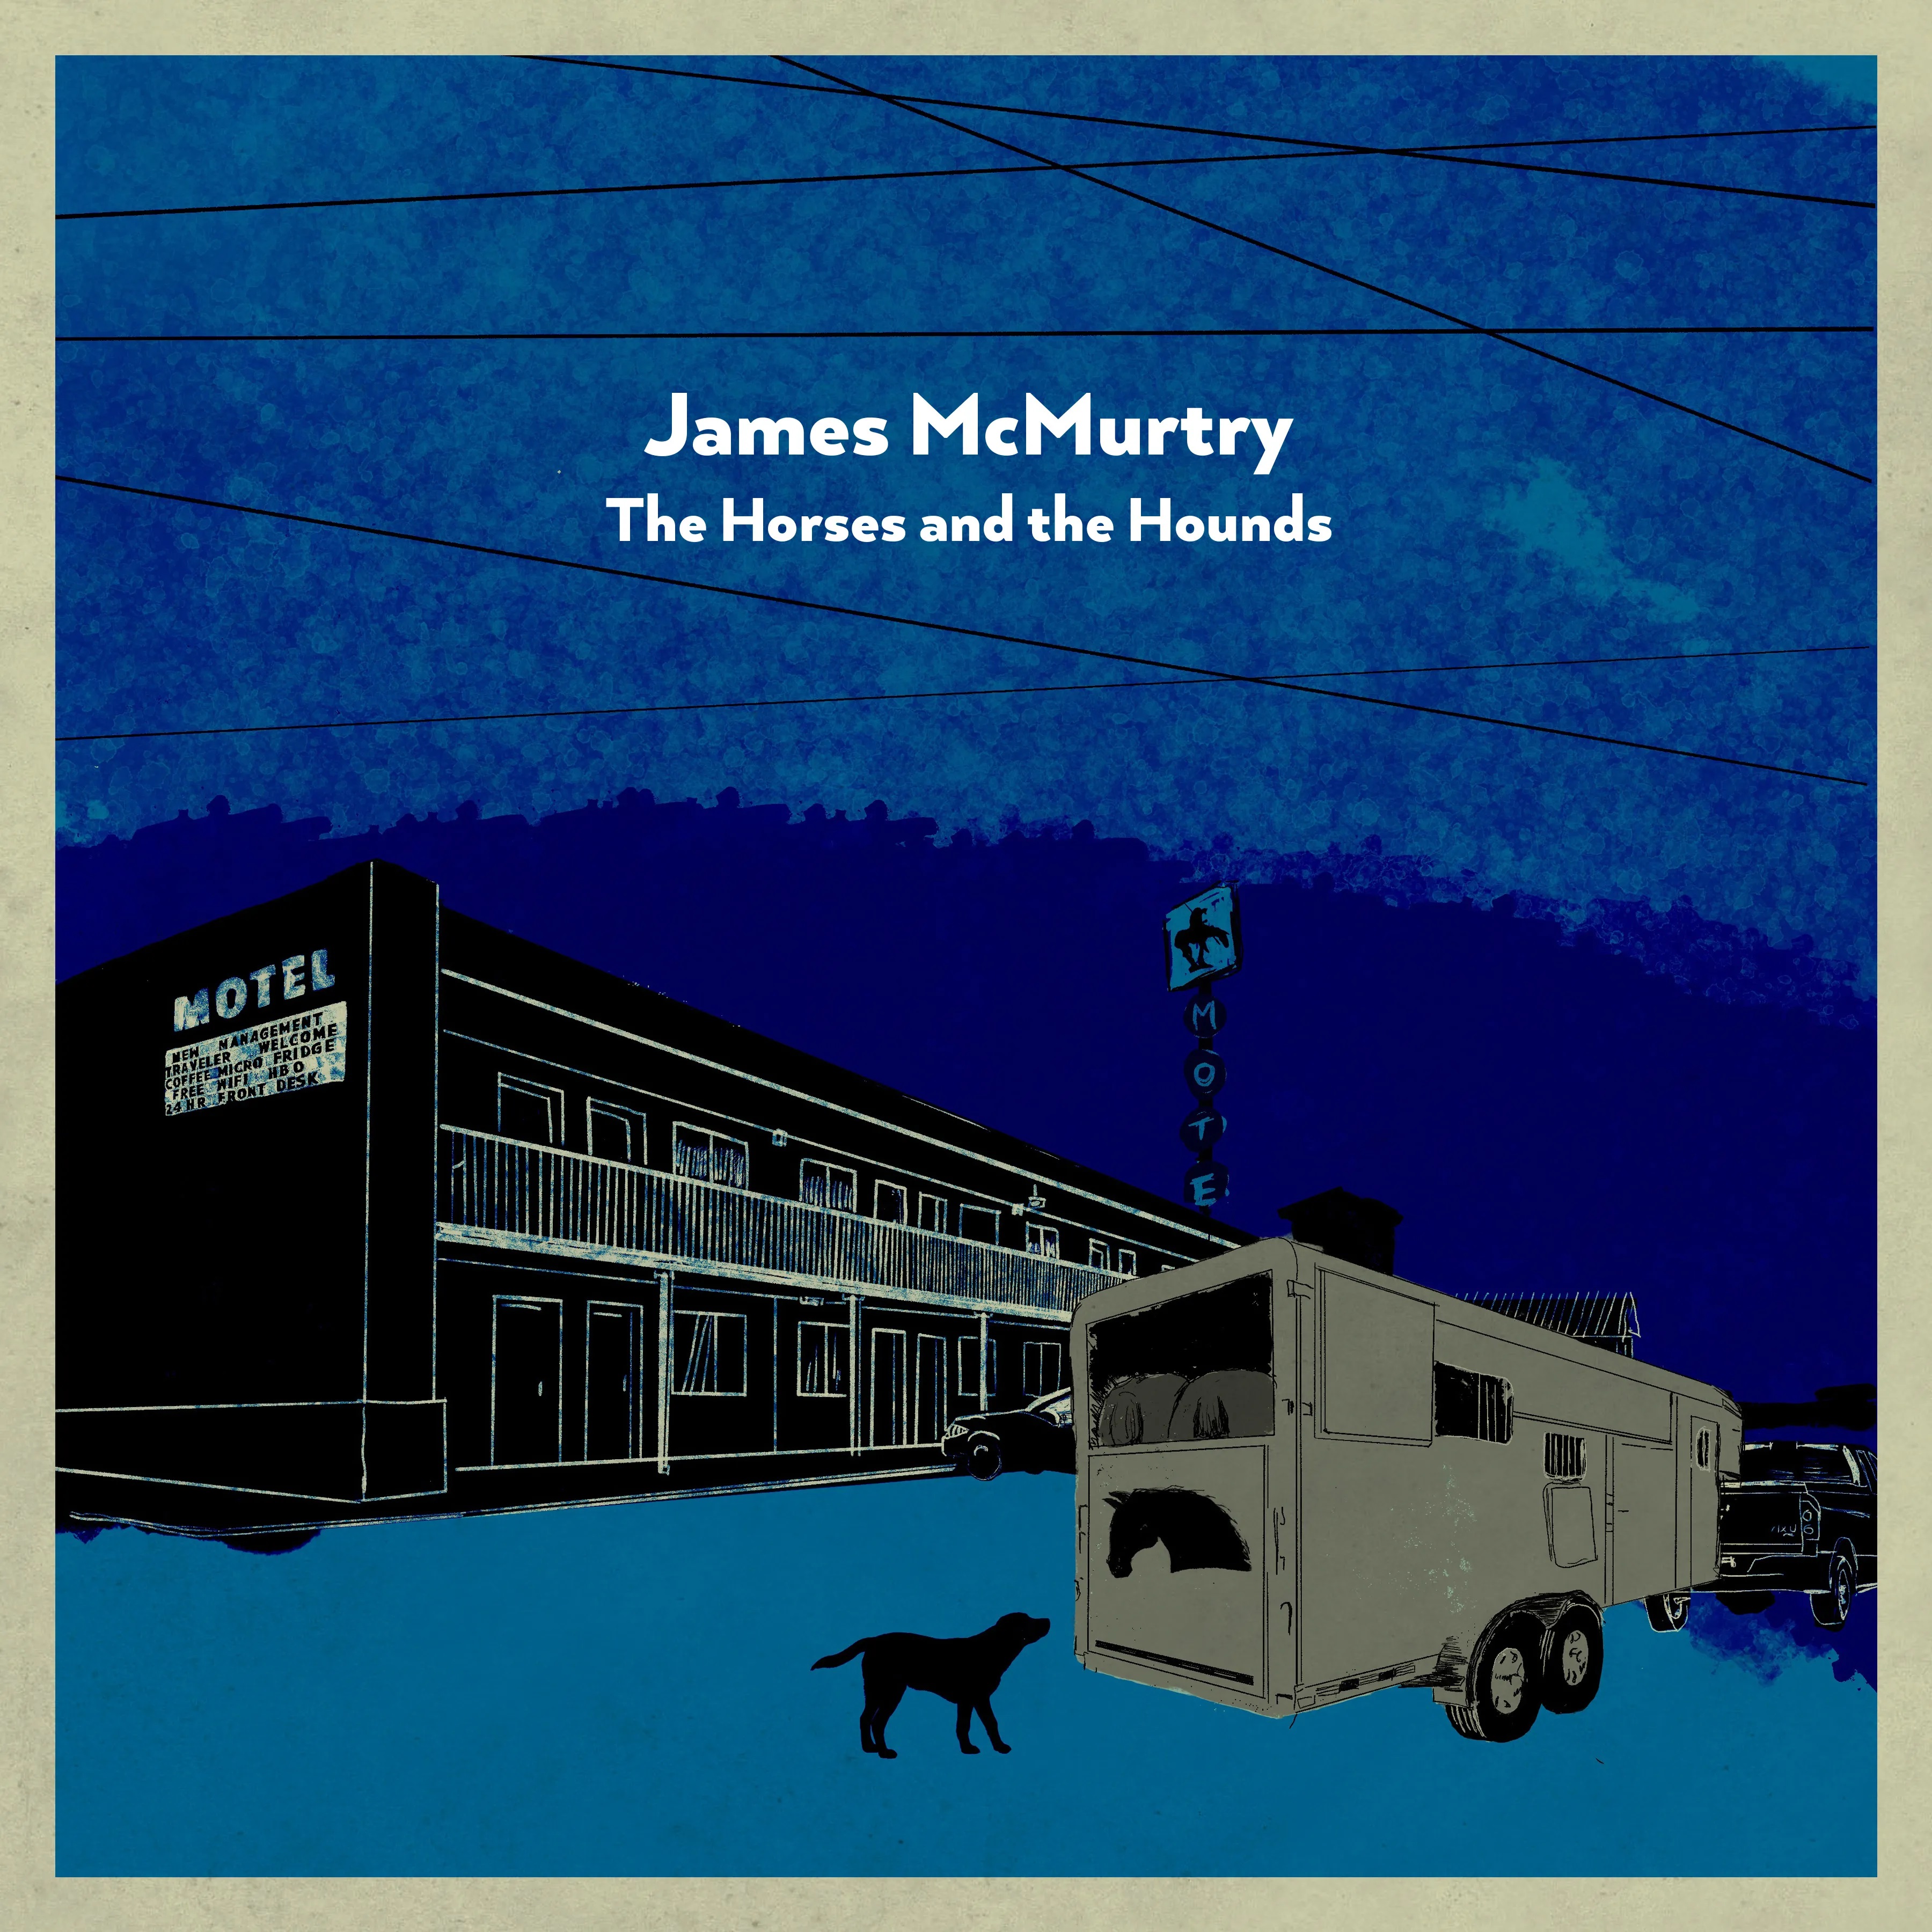 James McMurtry: The Horses and the Hounds